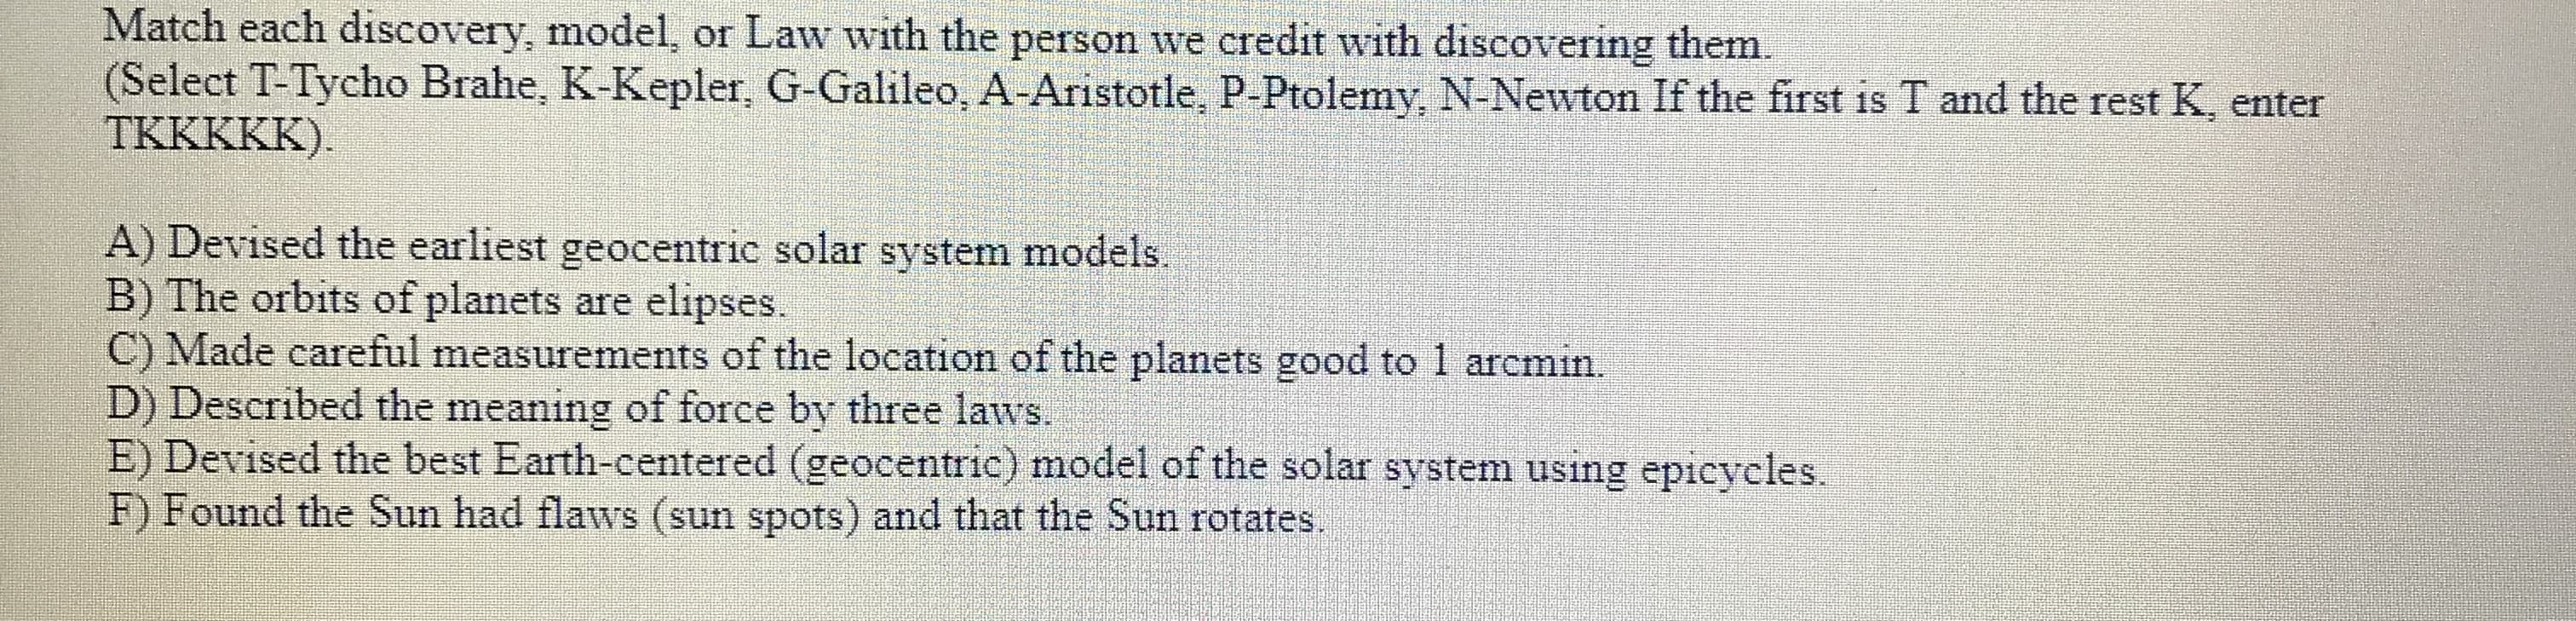 Match each discovery, model, or Law with the person we credit with discovering them
(Select T-Tycho Brahe, K-Kepler, G-Galileo, A-Aristotle, P-Ptolemy, N-Newton If the first is T and the rest K, enter
TKKKKK)
A) Devised the earliest geocentric solar system models
B) The orbits of planets are
C) Made careful measurements of the location of the planets good to 1 arcmin.
D) Described the meaning of force by three laws.
E) Devised the best Earth-centered (geocentric) model of the solar system using epicycles
F) Found the Sun had flaws (sun spots) and that the Sun rotates.
elipses
